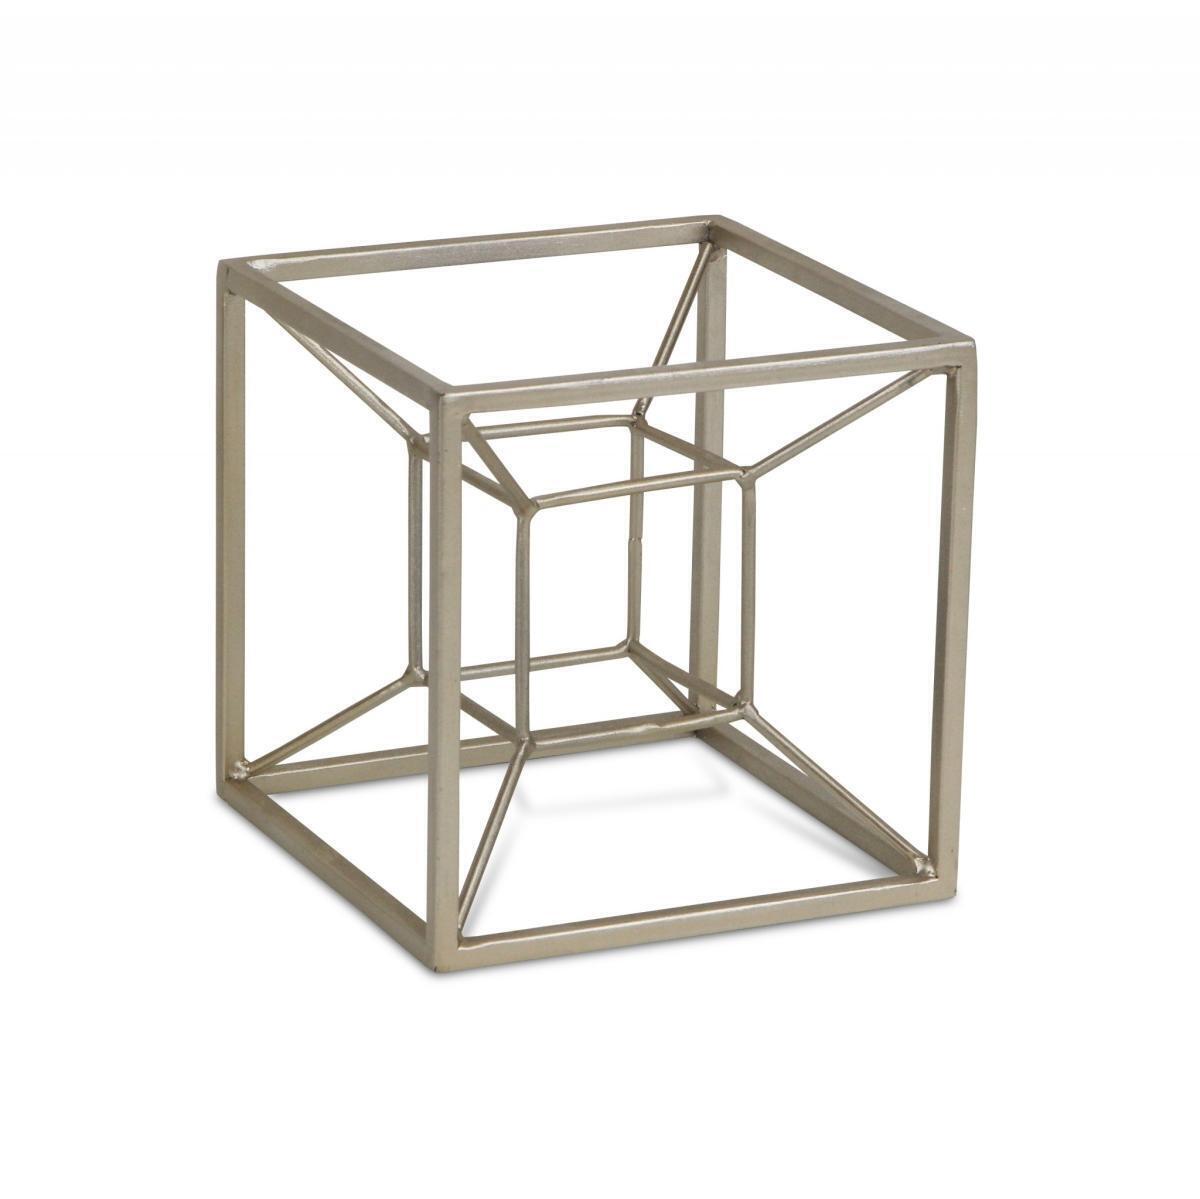 HomeRoots 399638 6 x 6 x 6 in. Champagne Metal 3D Cube Decorative Sculpture